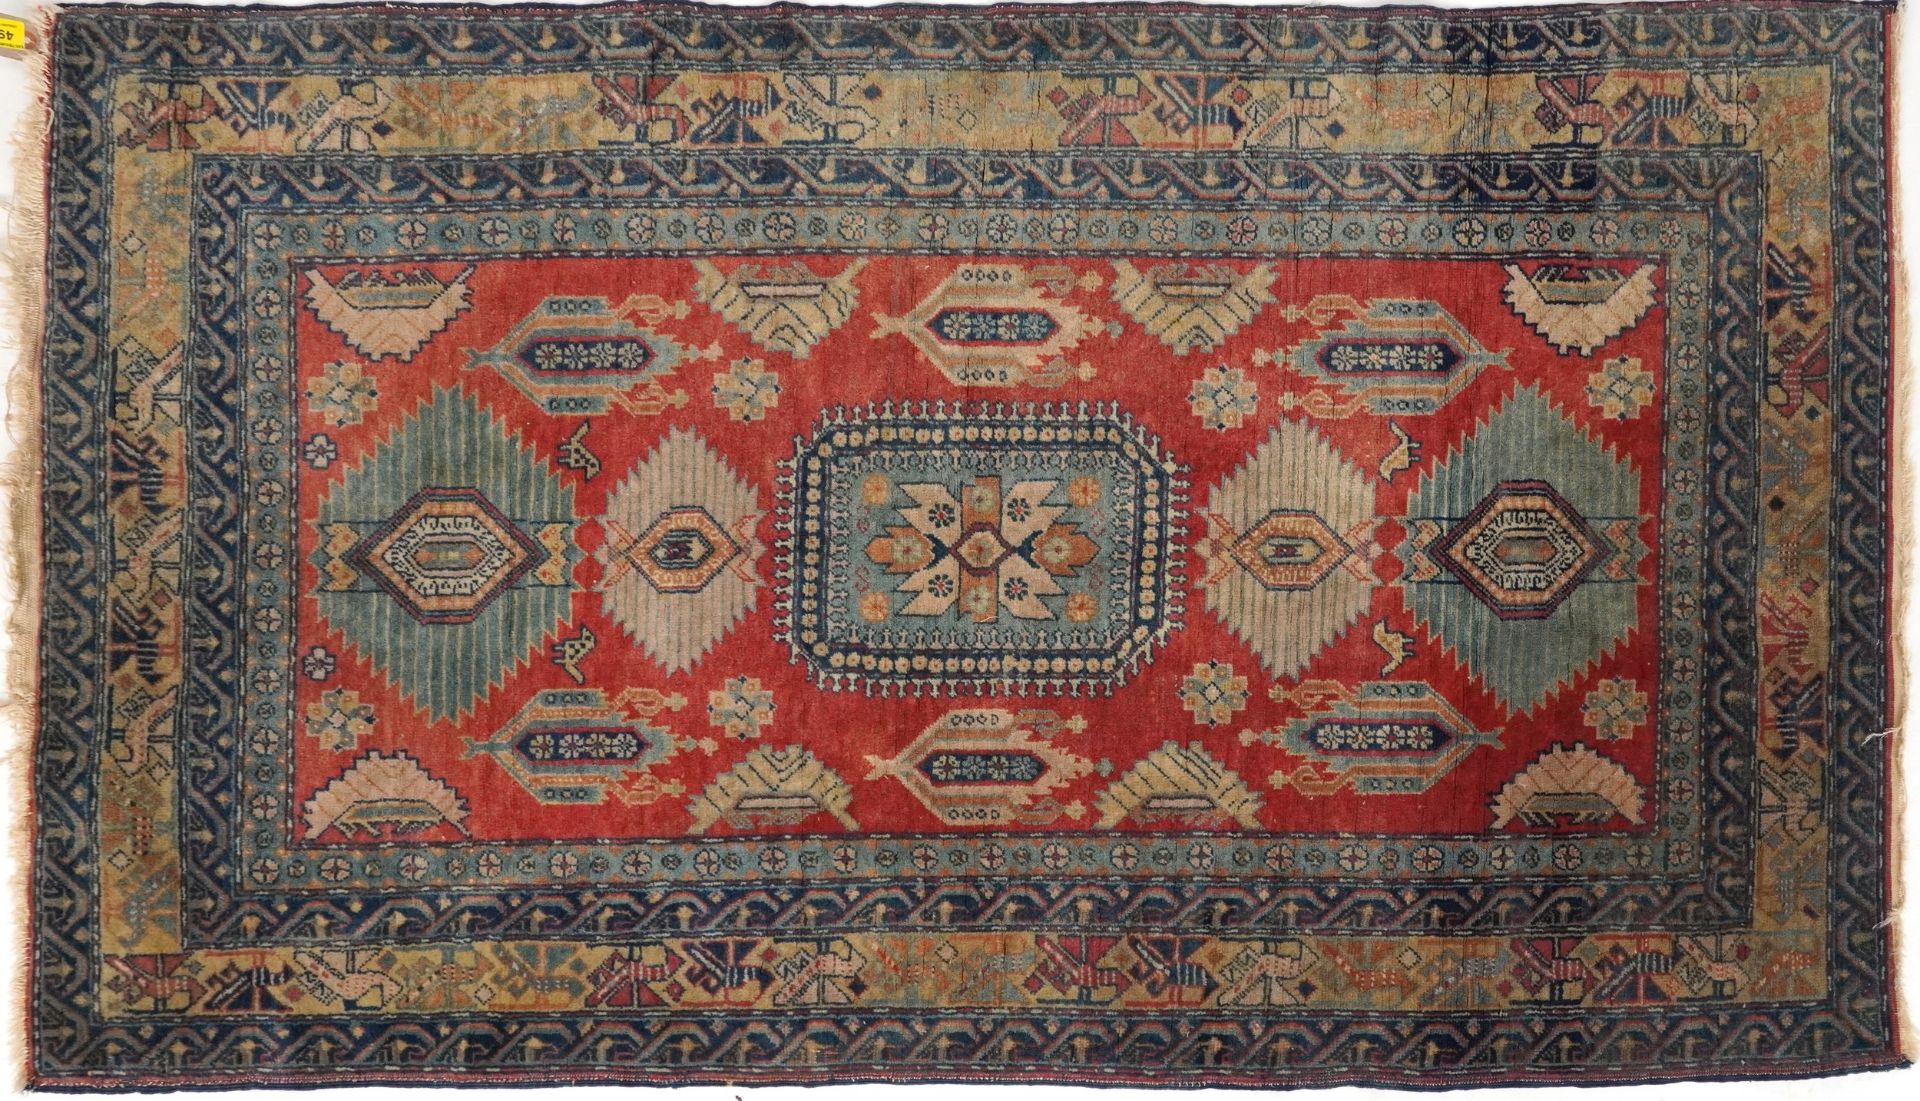 Rectangular Persian rug having an all over floral design, 158cm x 95cm : For further information